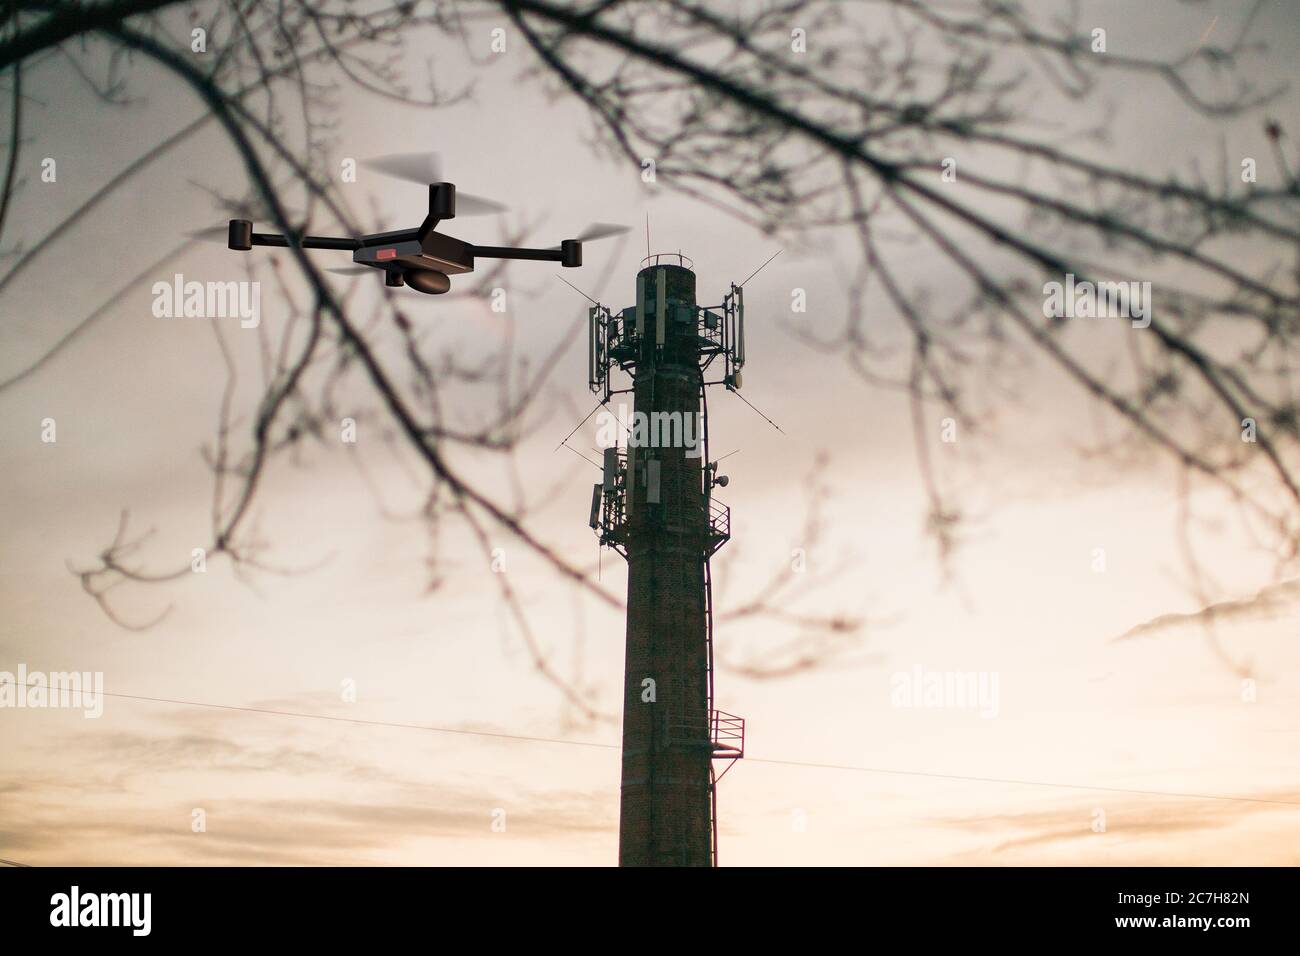 cellular signal tower inspecting and detecting drone Stock Photo